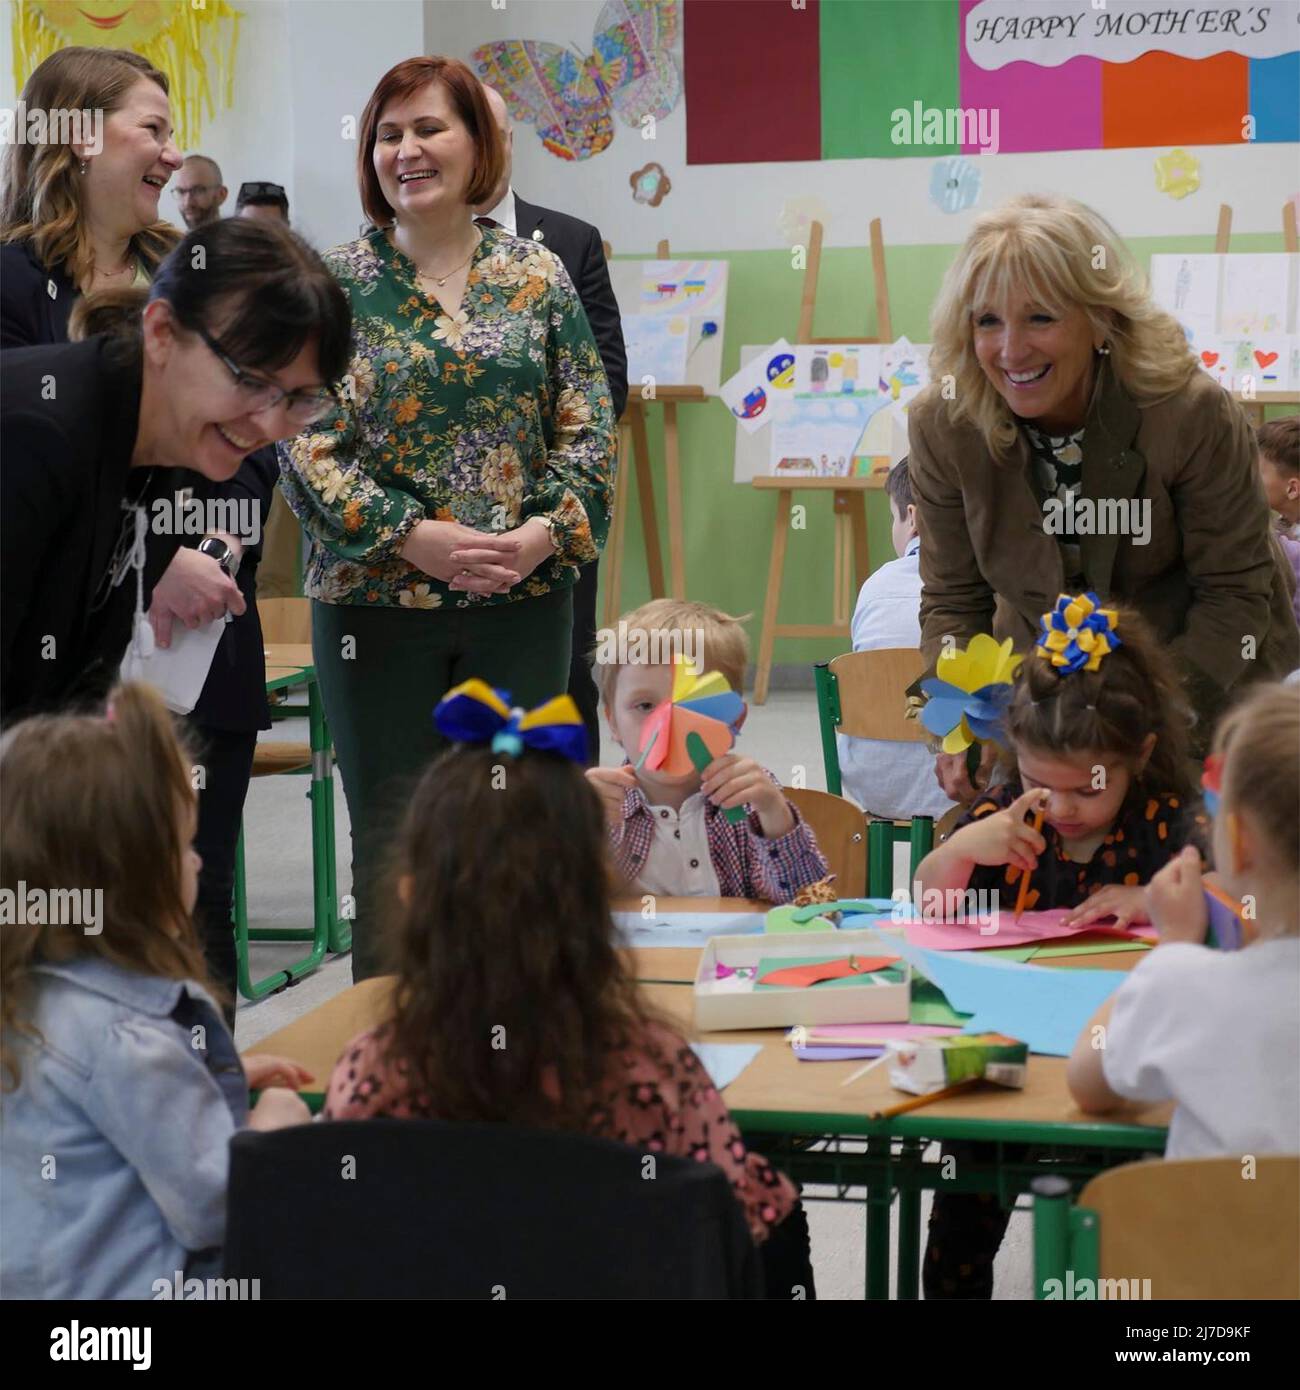 Kosice, Slovakia. 08 May, 2022. U.S. First Lady Jill Biden, right, visits with Ukrainian mothers and their children during a Mother’s Day visit to a refugee center, May 8, 2022 in Kosice, Slovakia.  Credit: U.S. Embassy Slovakia/State Department/Alamy Live News Stock Photo